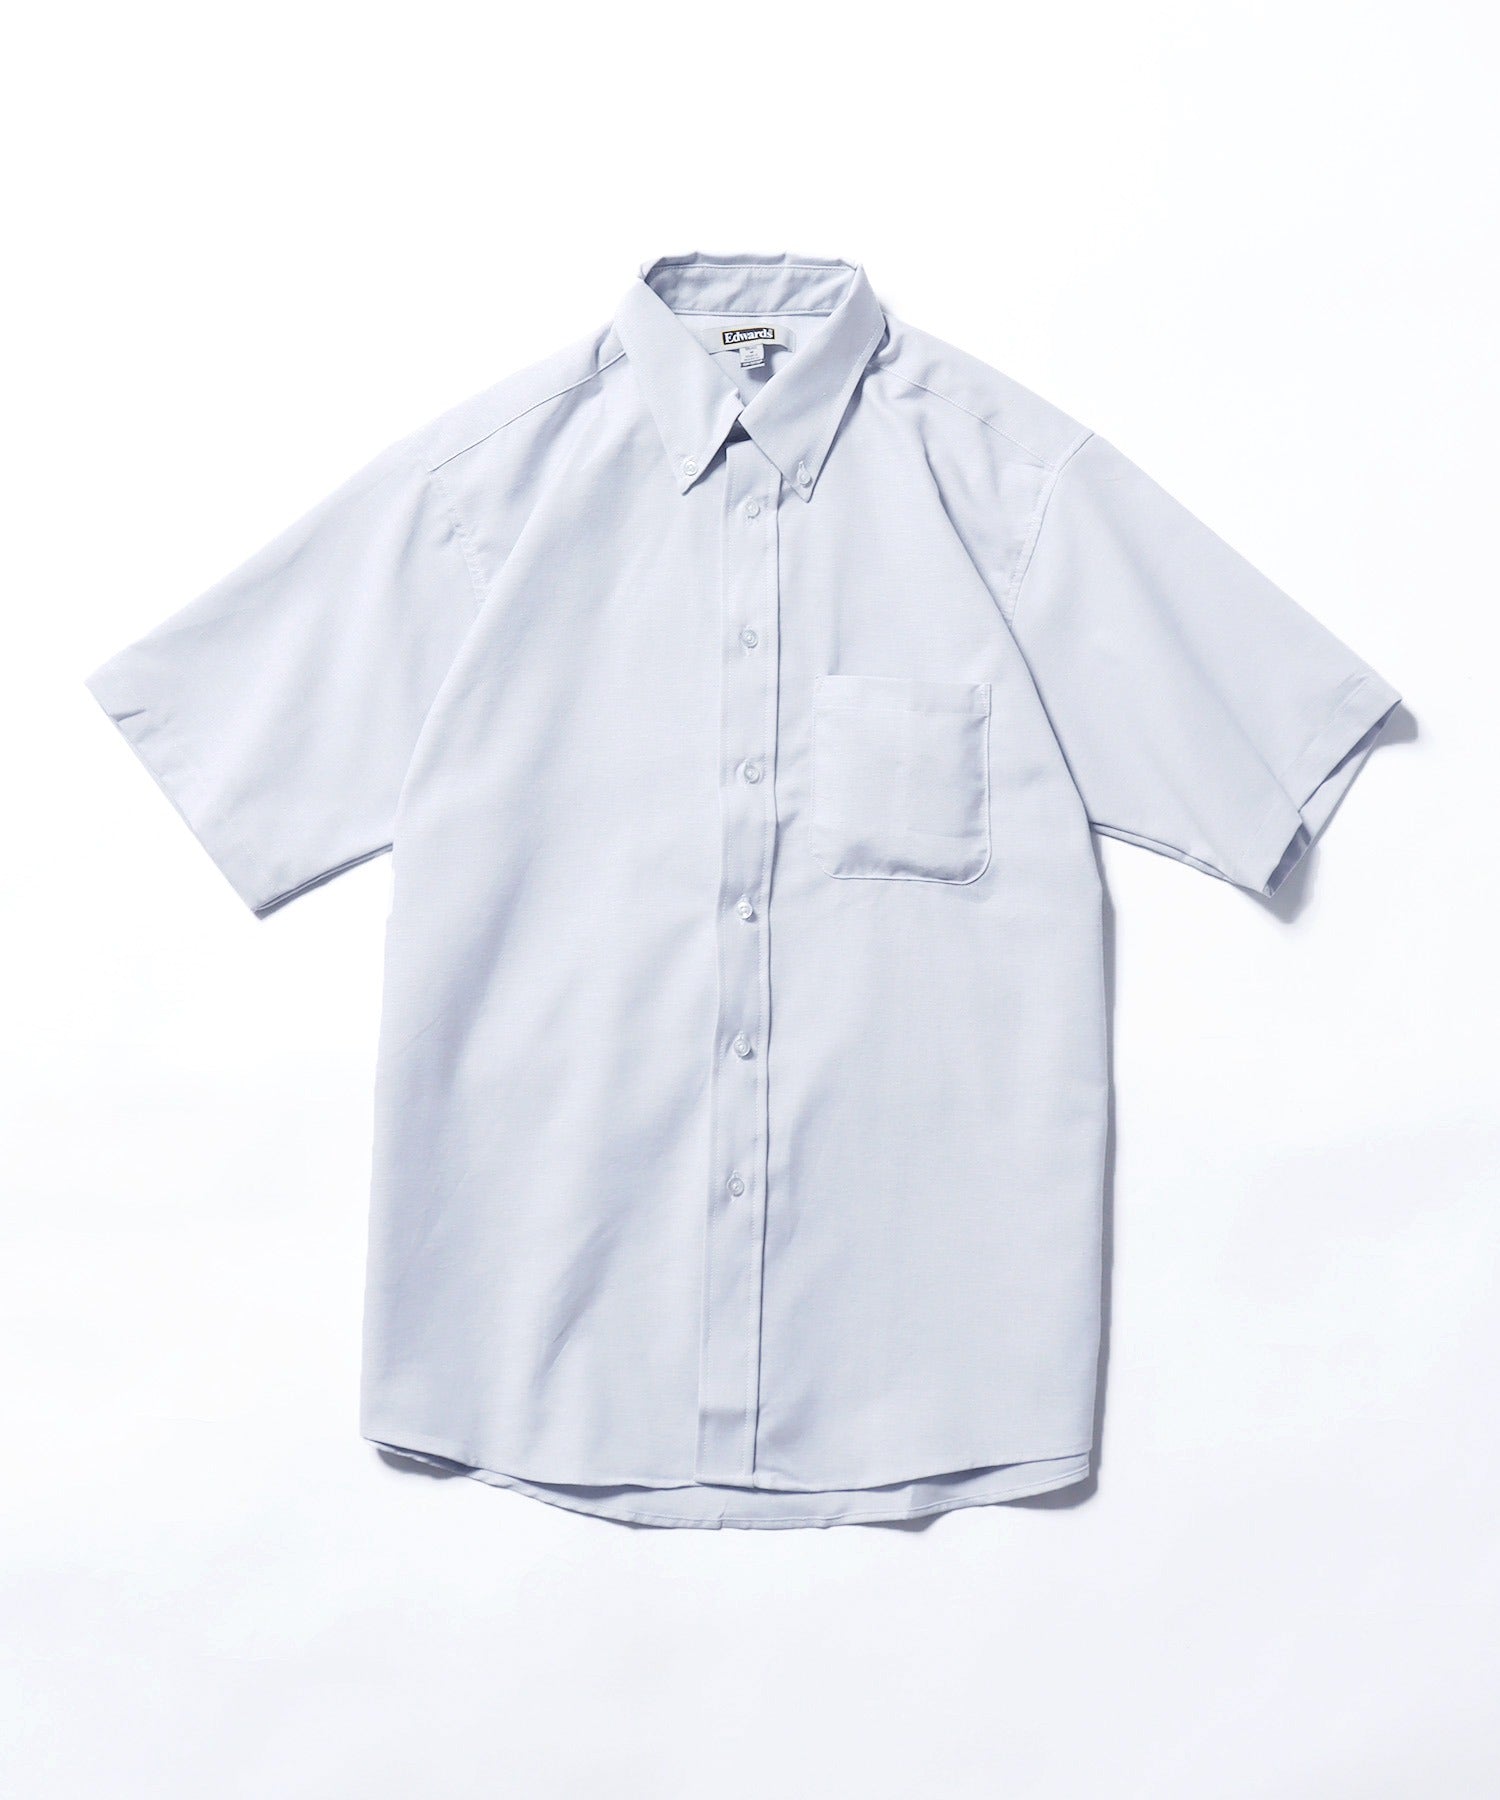 Relax Fit Shirt